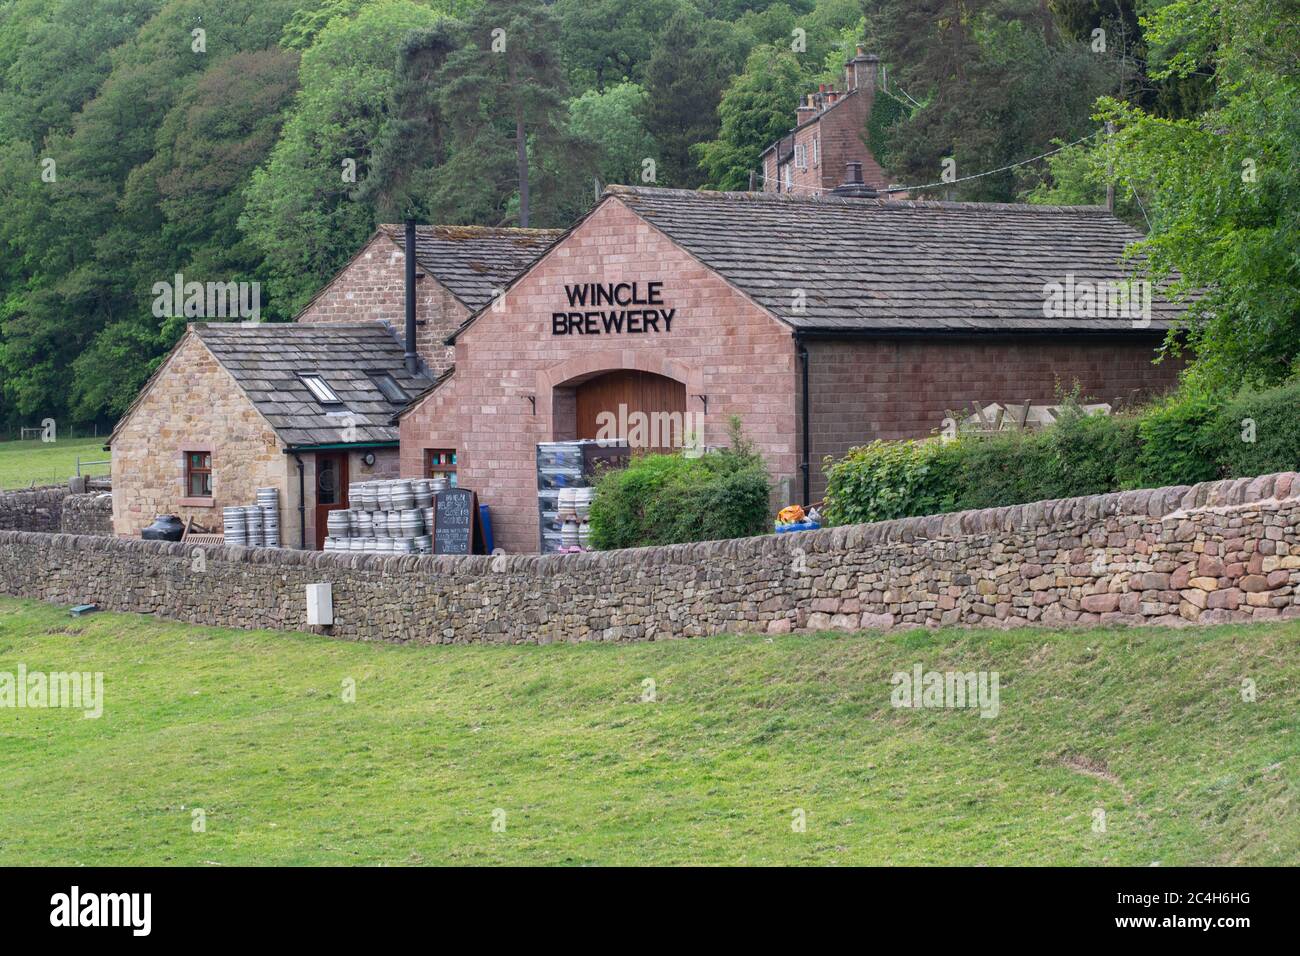 Wincle Brewery with sign, metal cask. Sandstone building with slate roof in Vale Royal Stock Photo